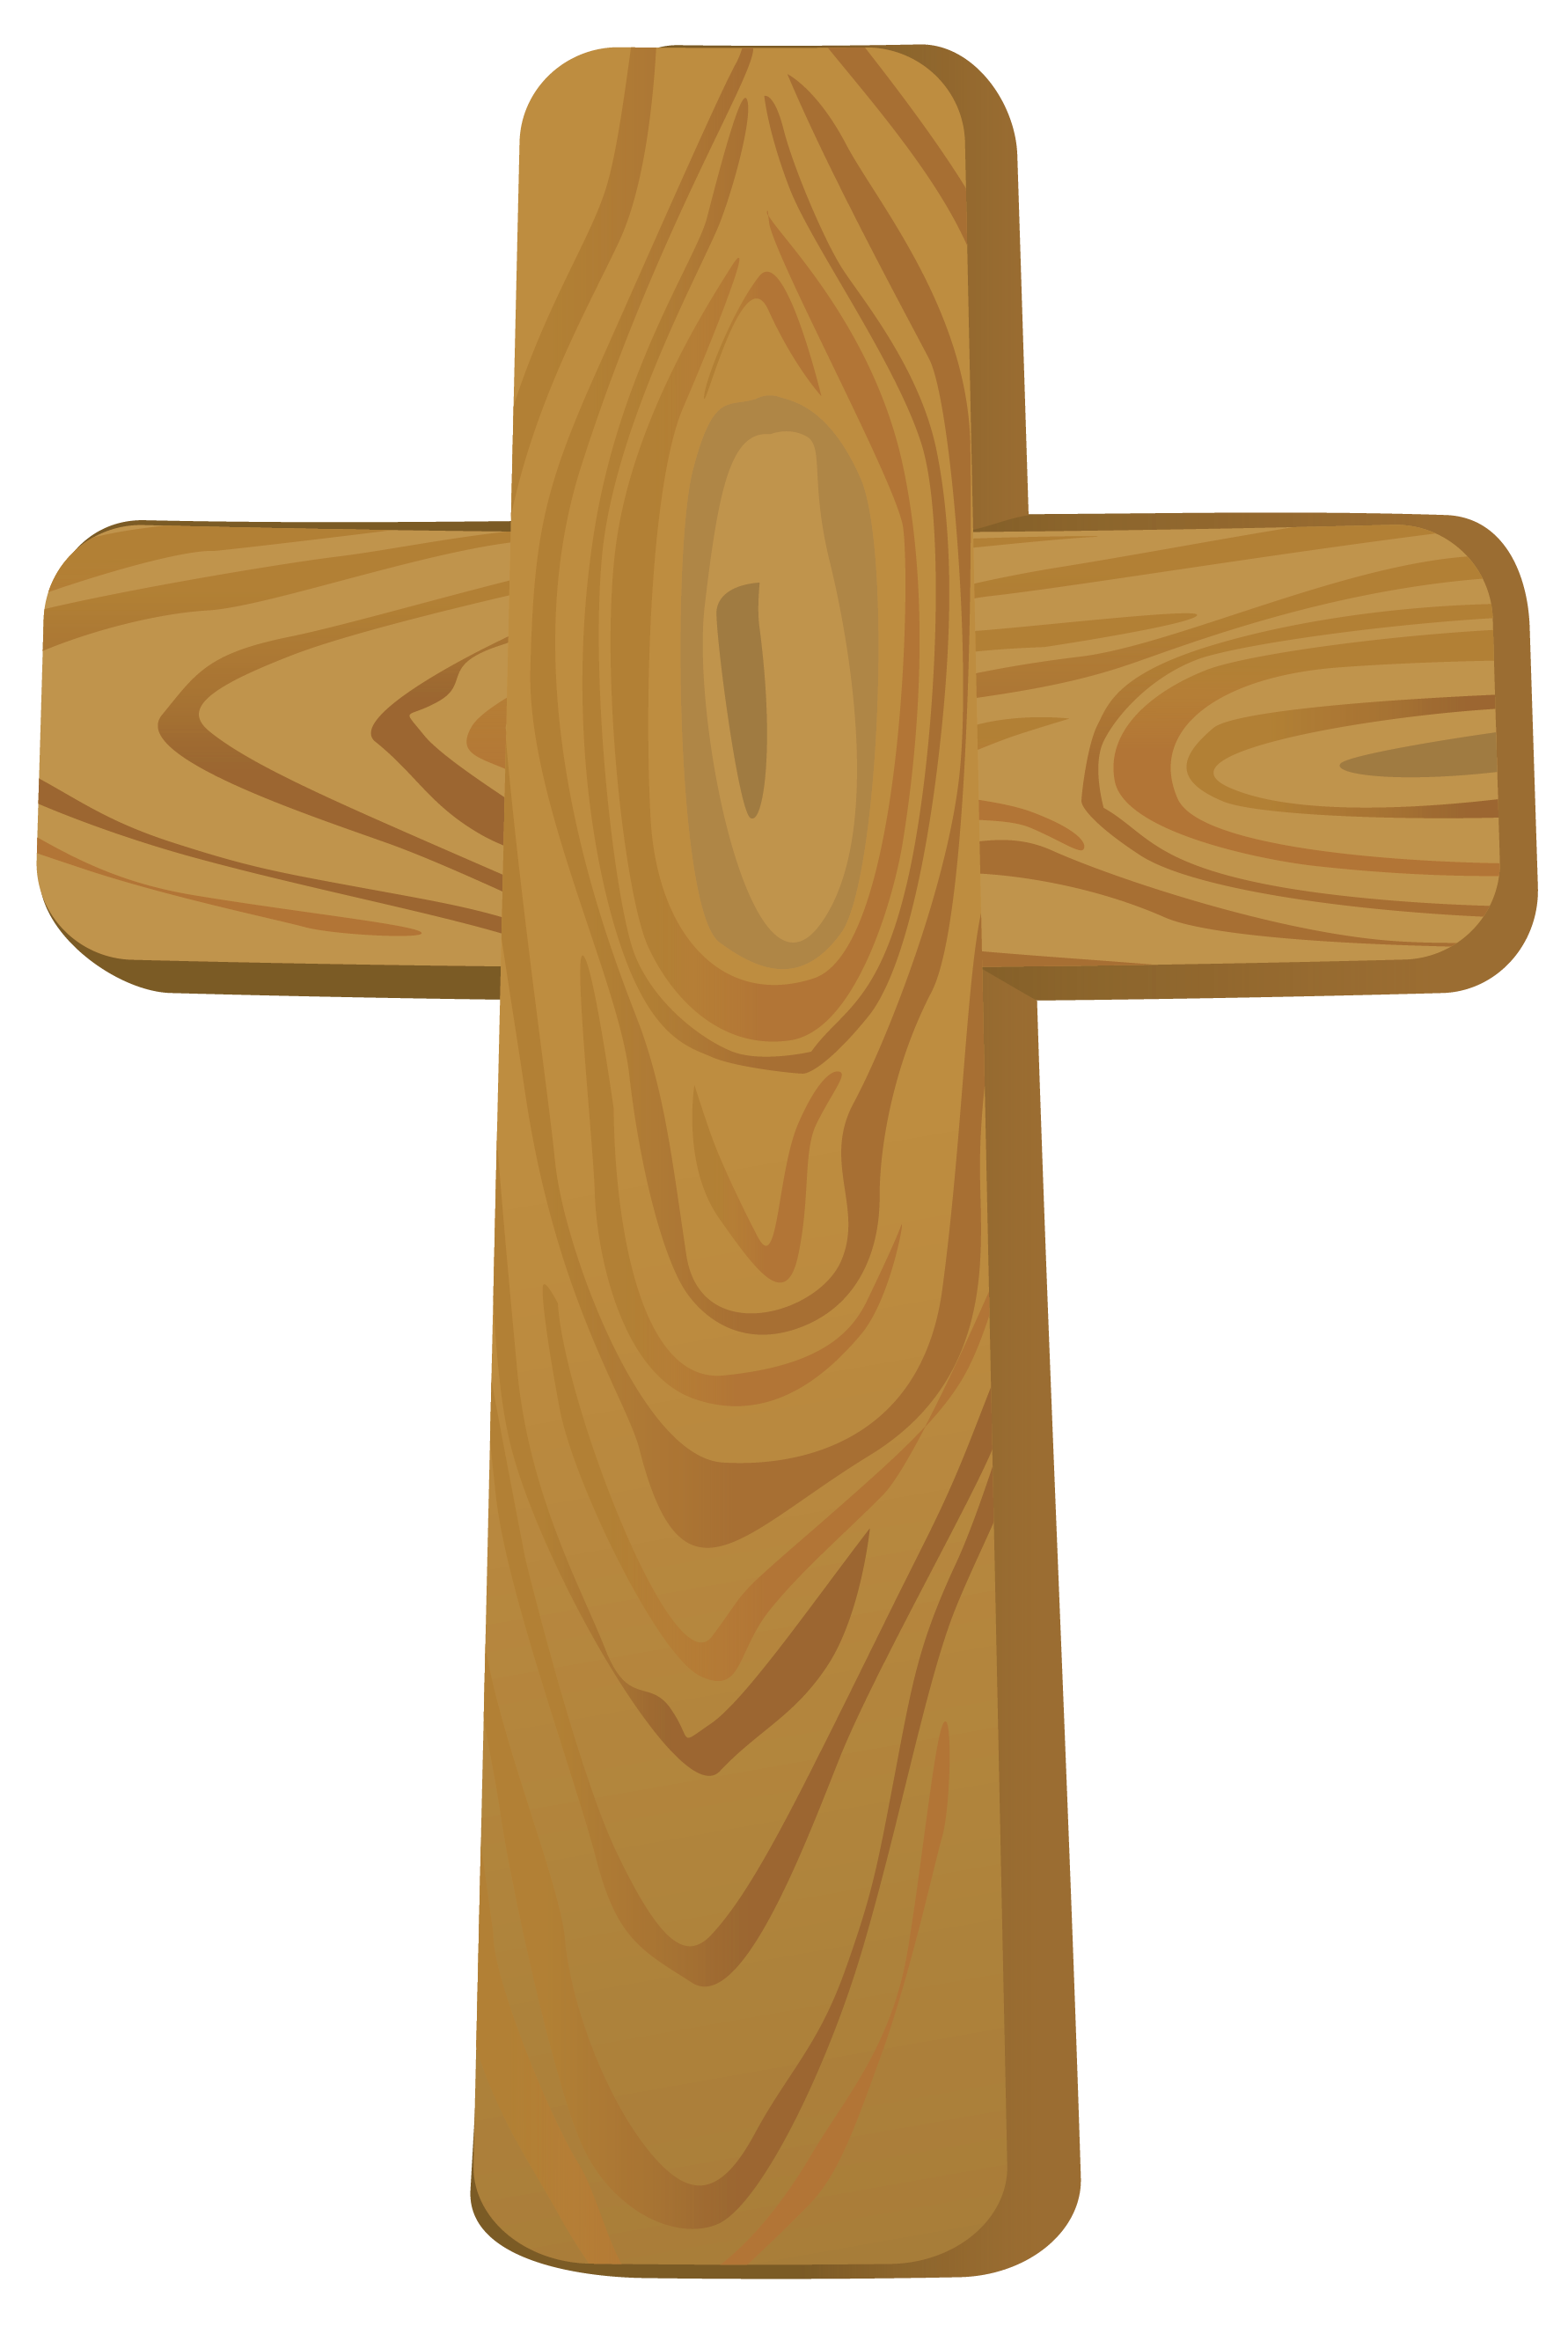 Wooden Cross PNG Clipart Picture | Gallery Yopriceville - High ...